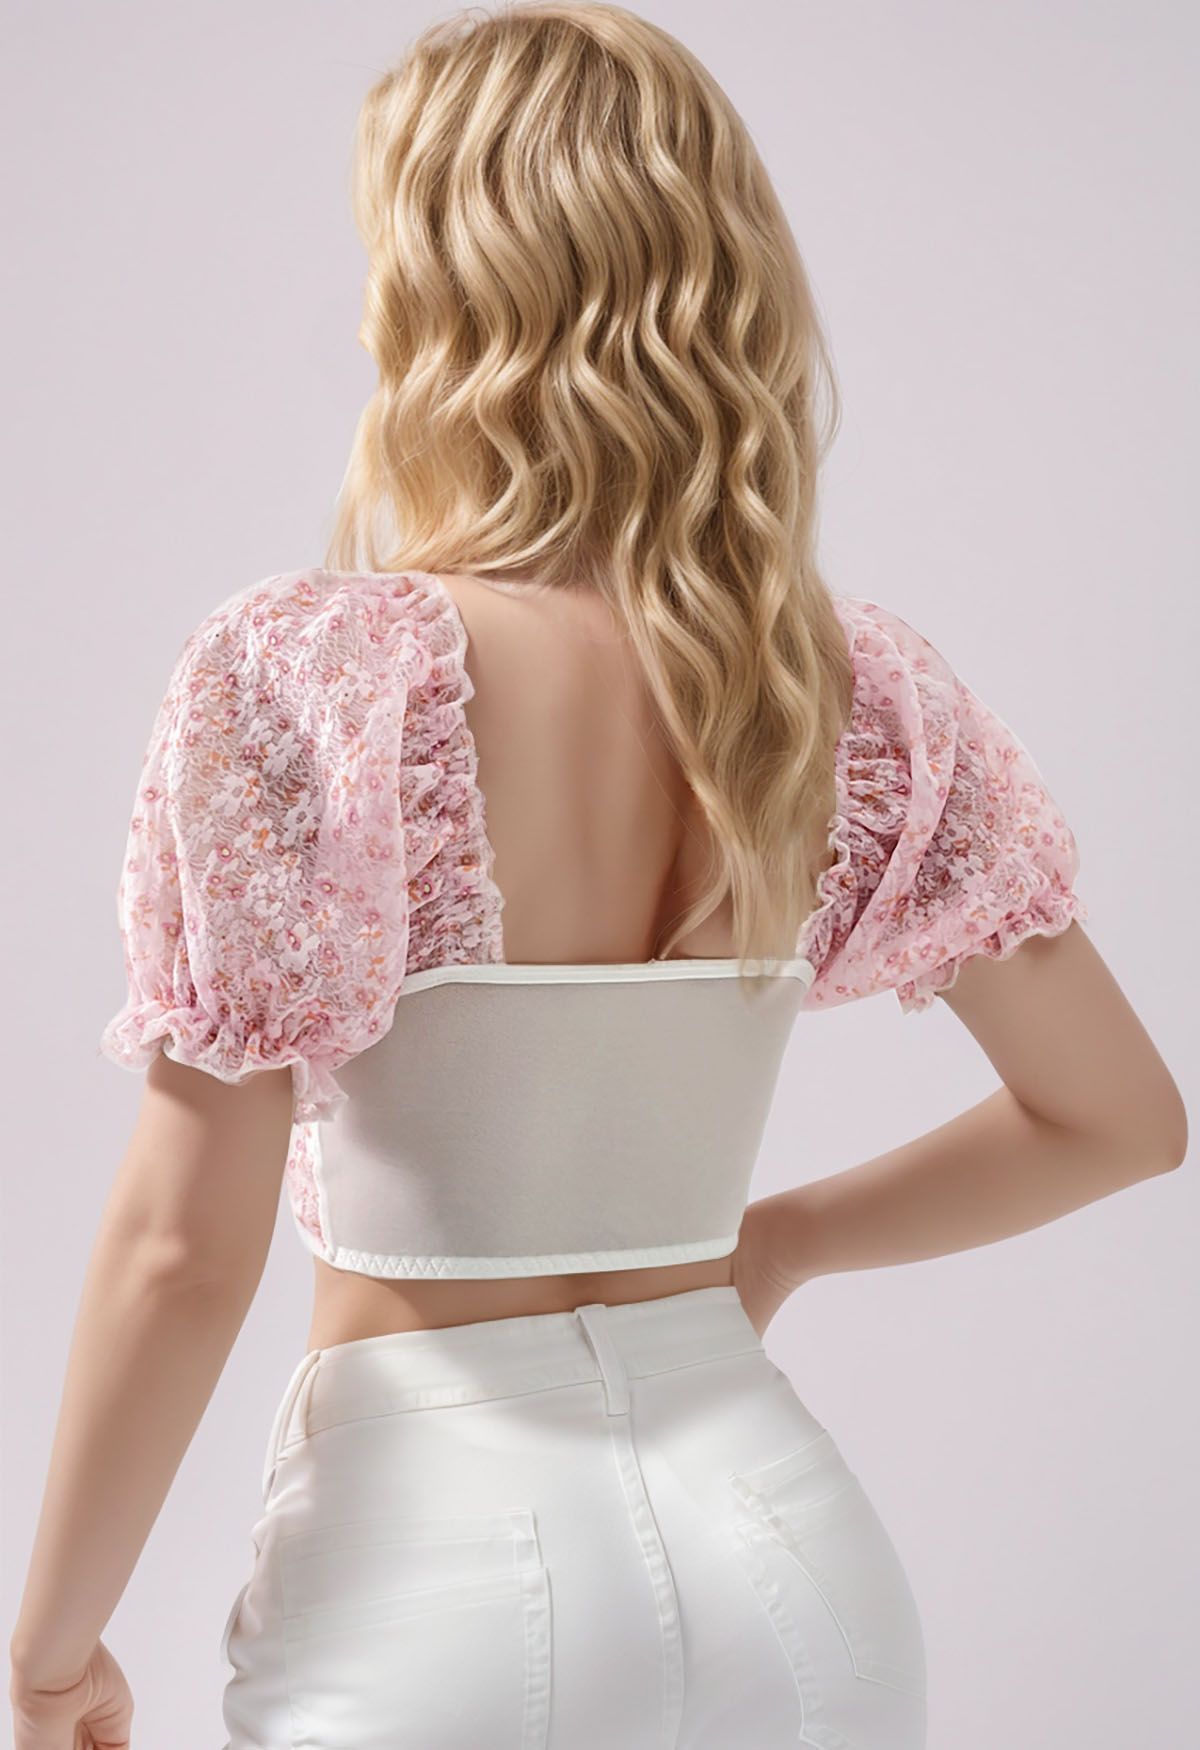 Bubble Sleeve Floret Lace Bustier Crop Top in Pink